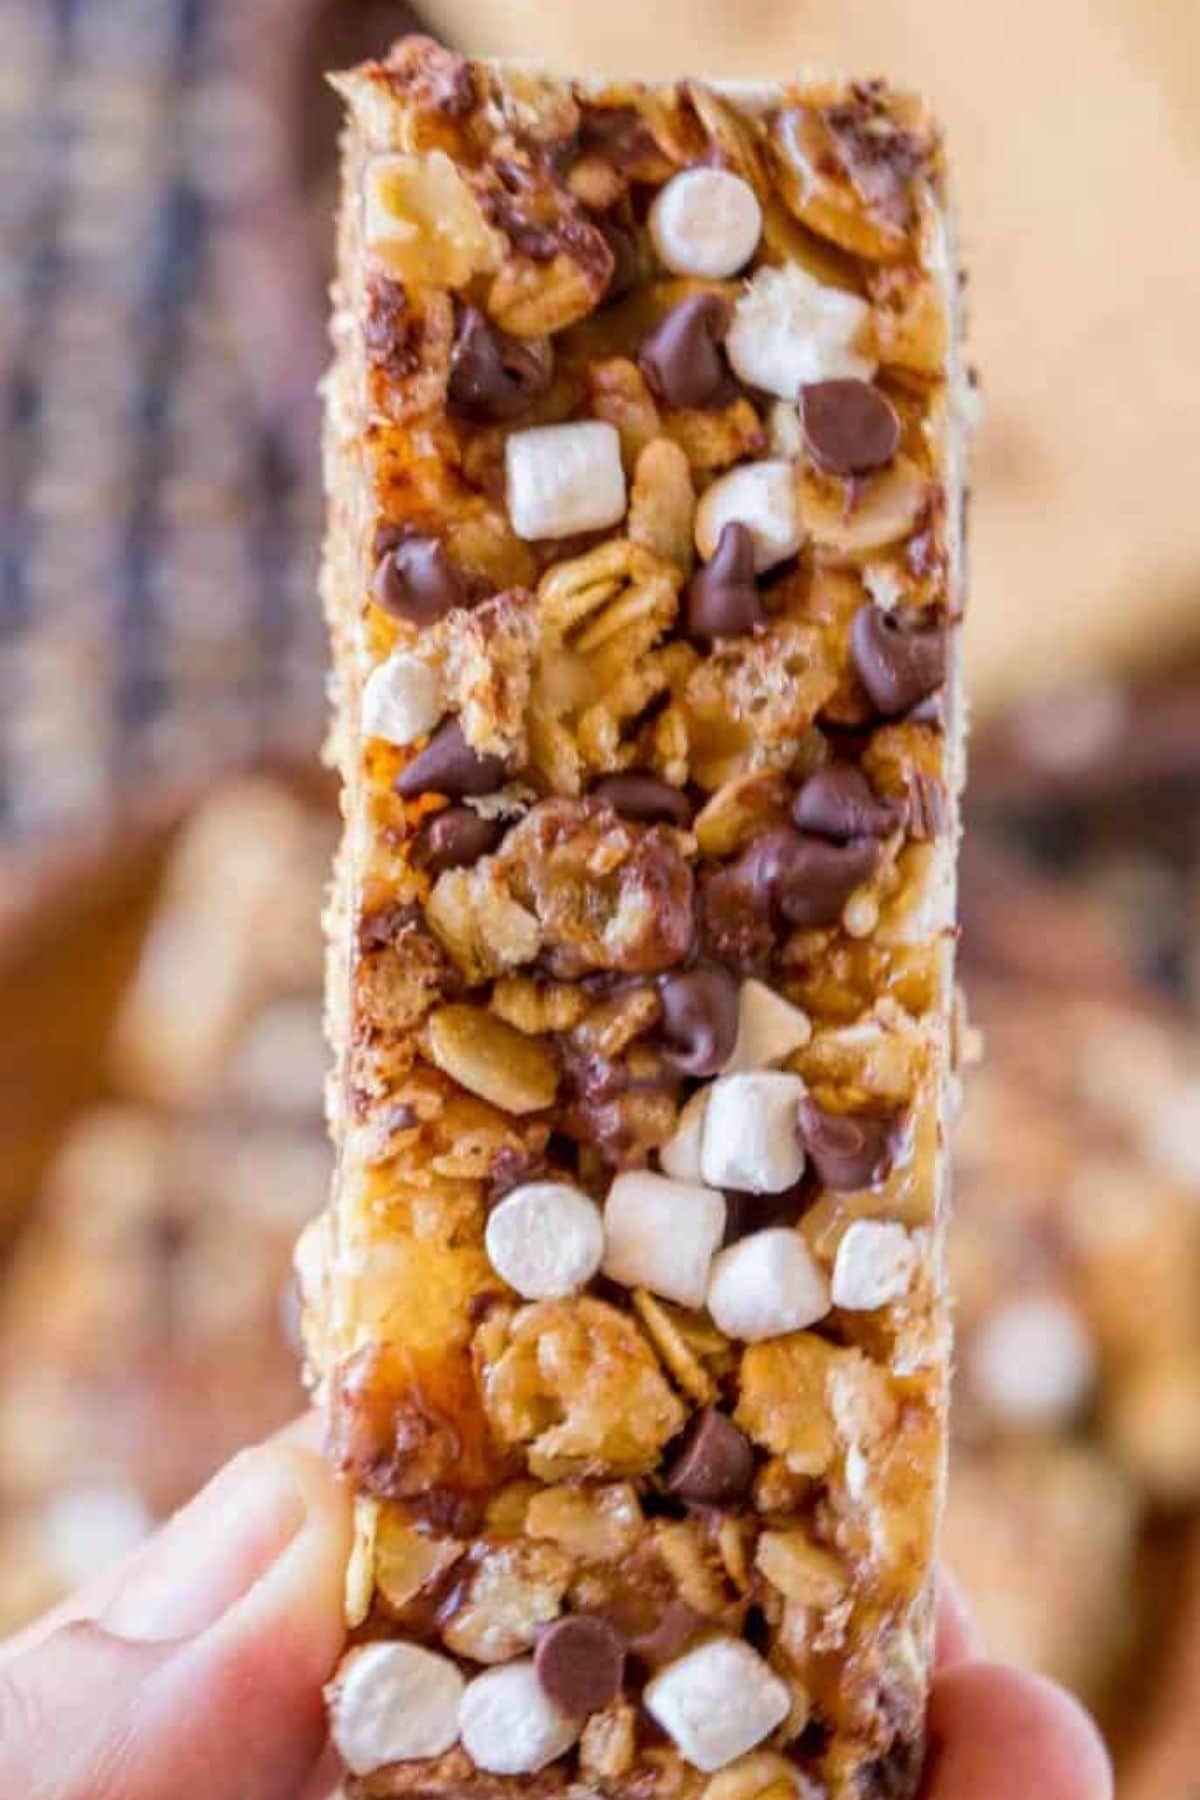 Hand holding granola bar with chocolate chips and mini marshmallows